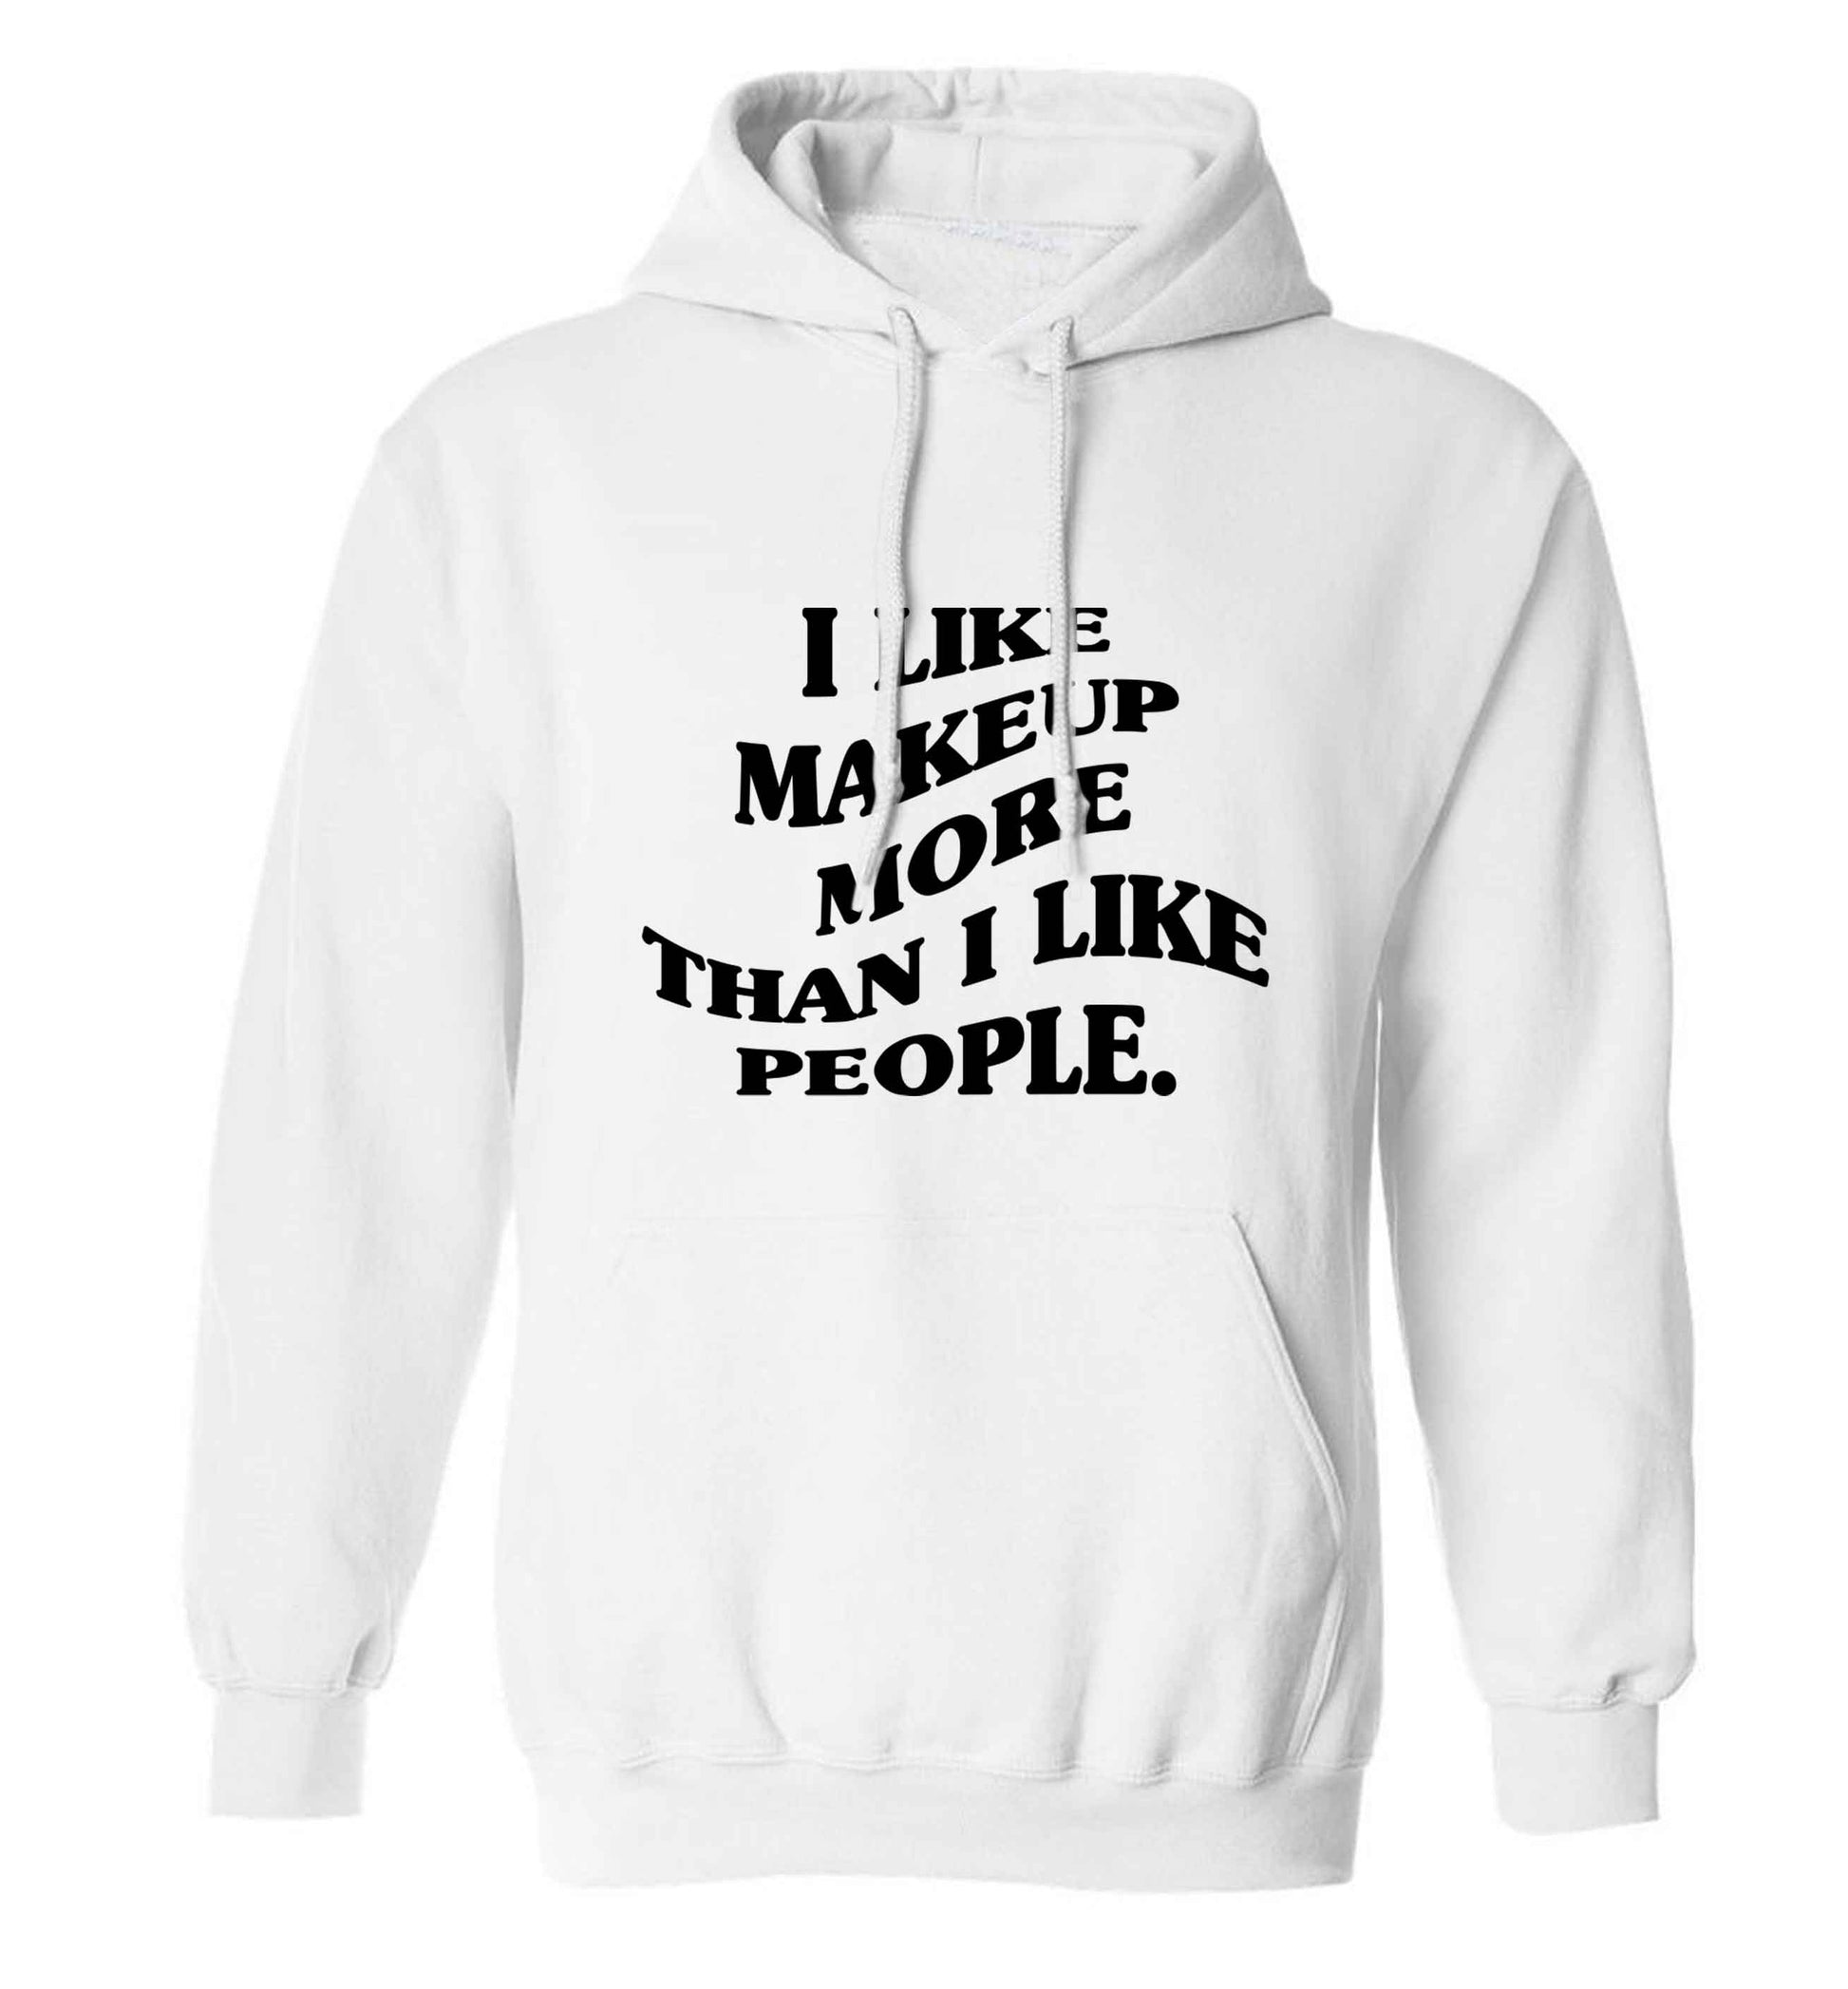 I like makeup more than people adults unisex white hoodie 2XL